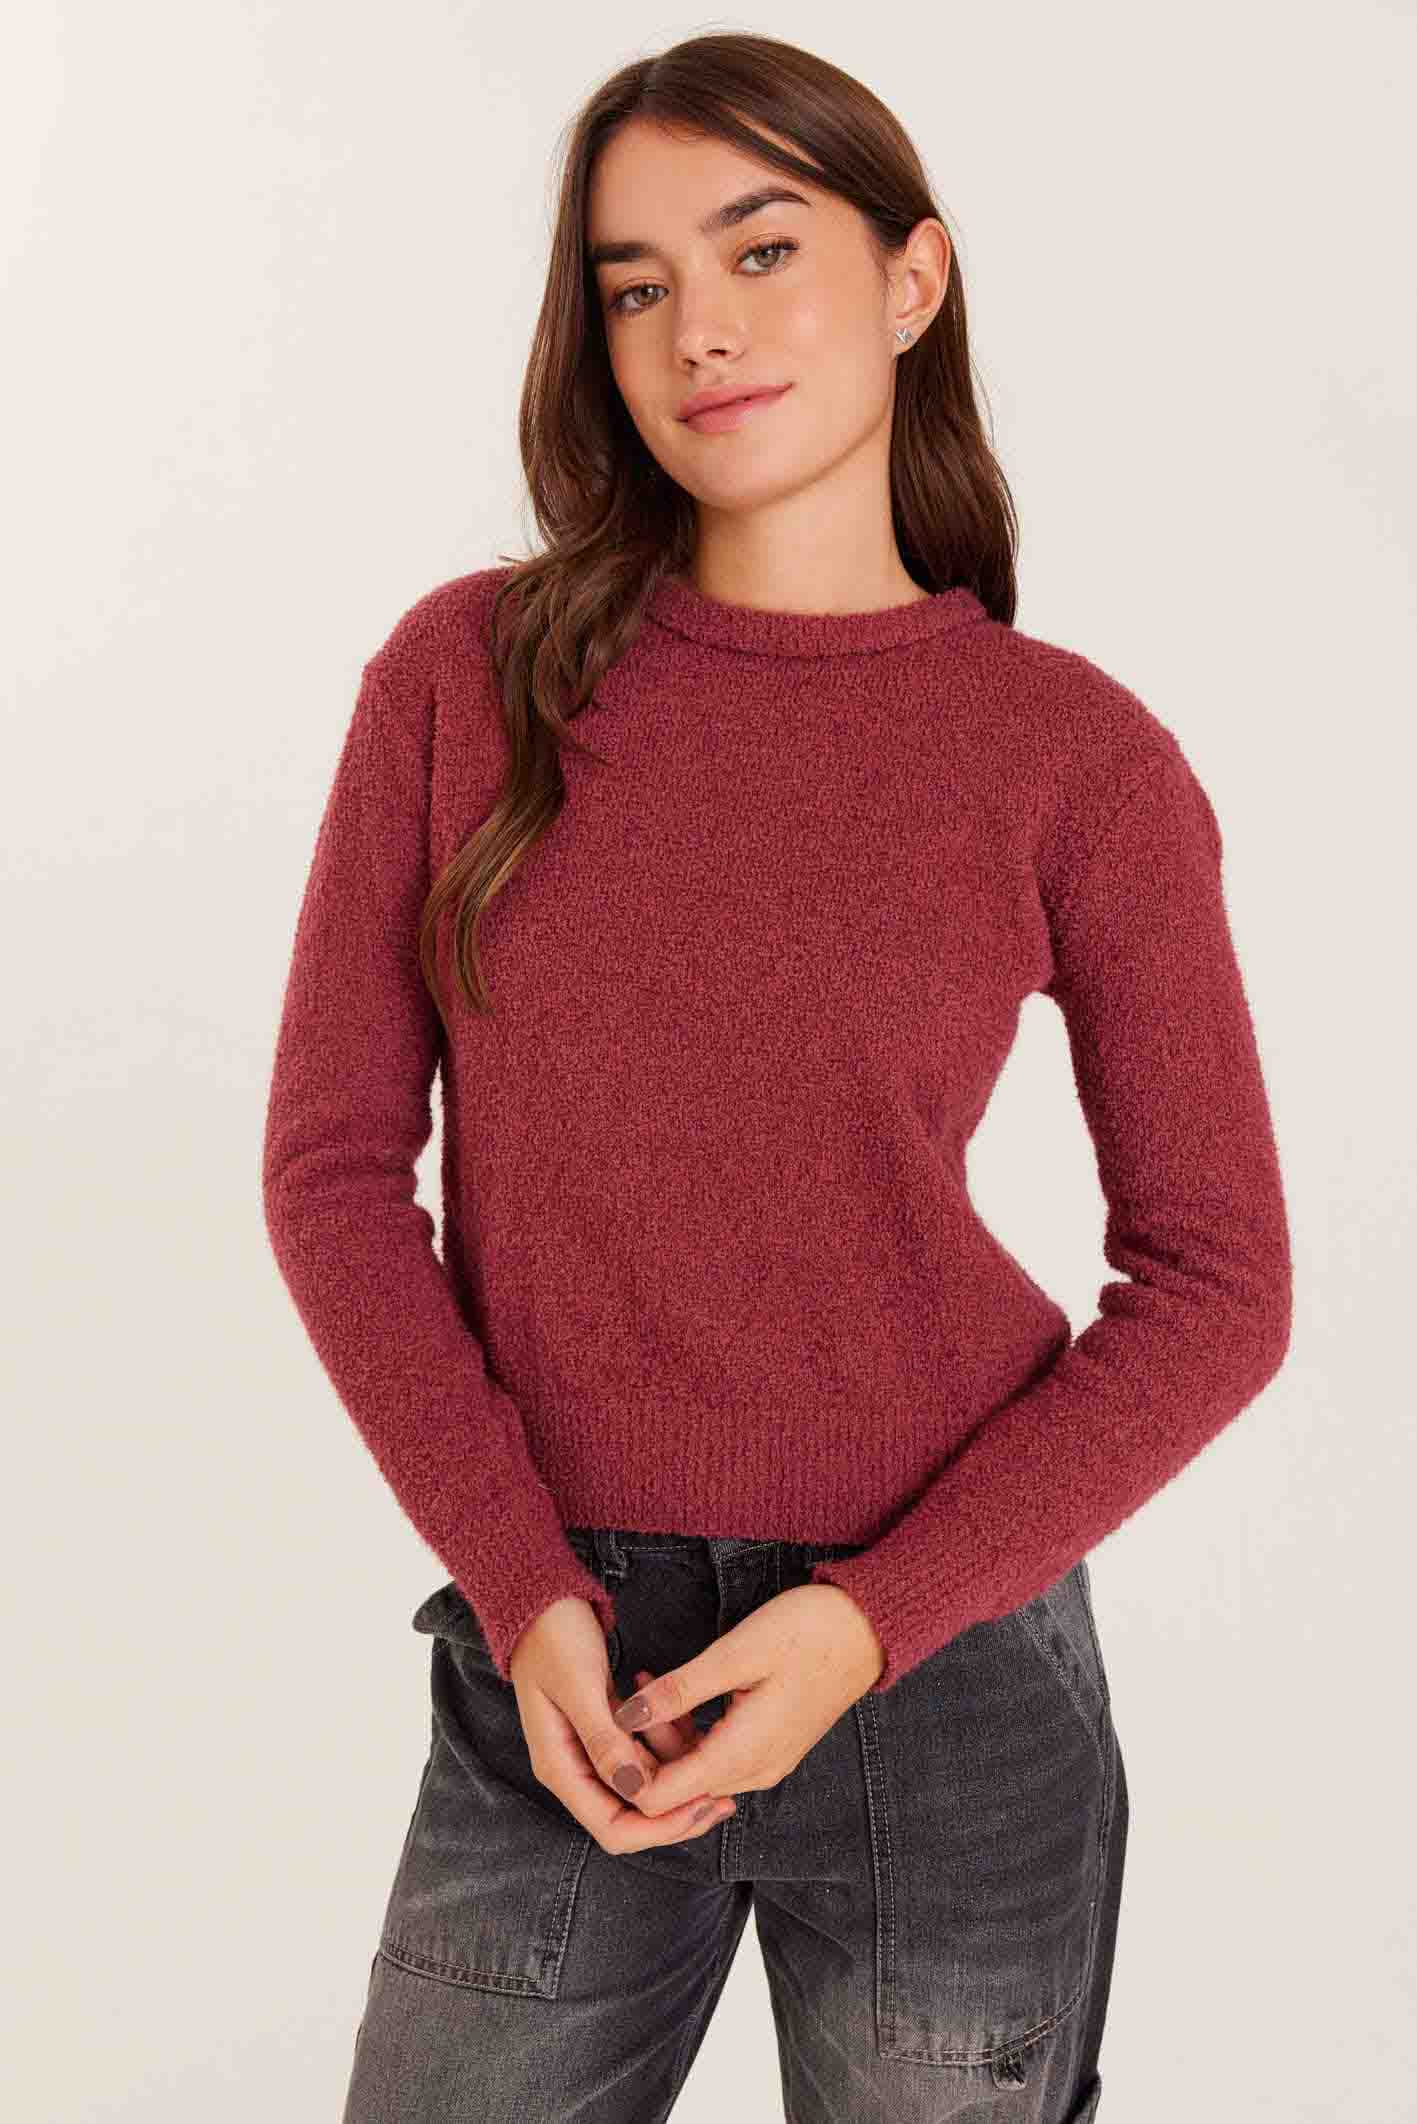 comoquieres_sweater-softly-xs_32-16-2024__picture-45238